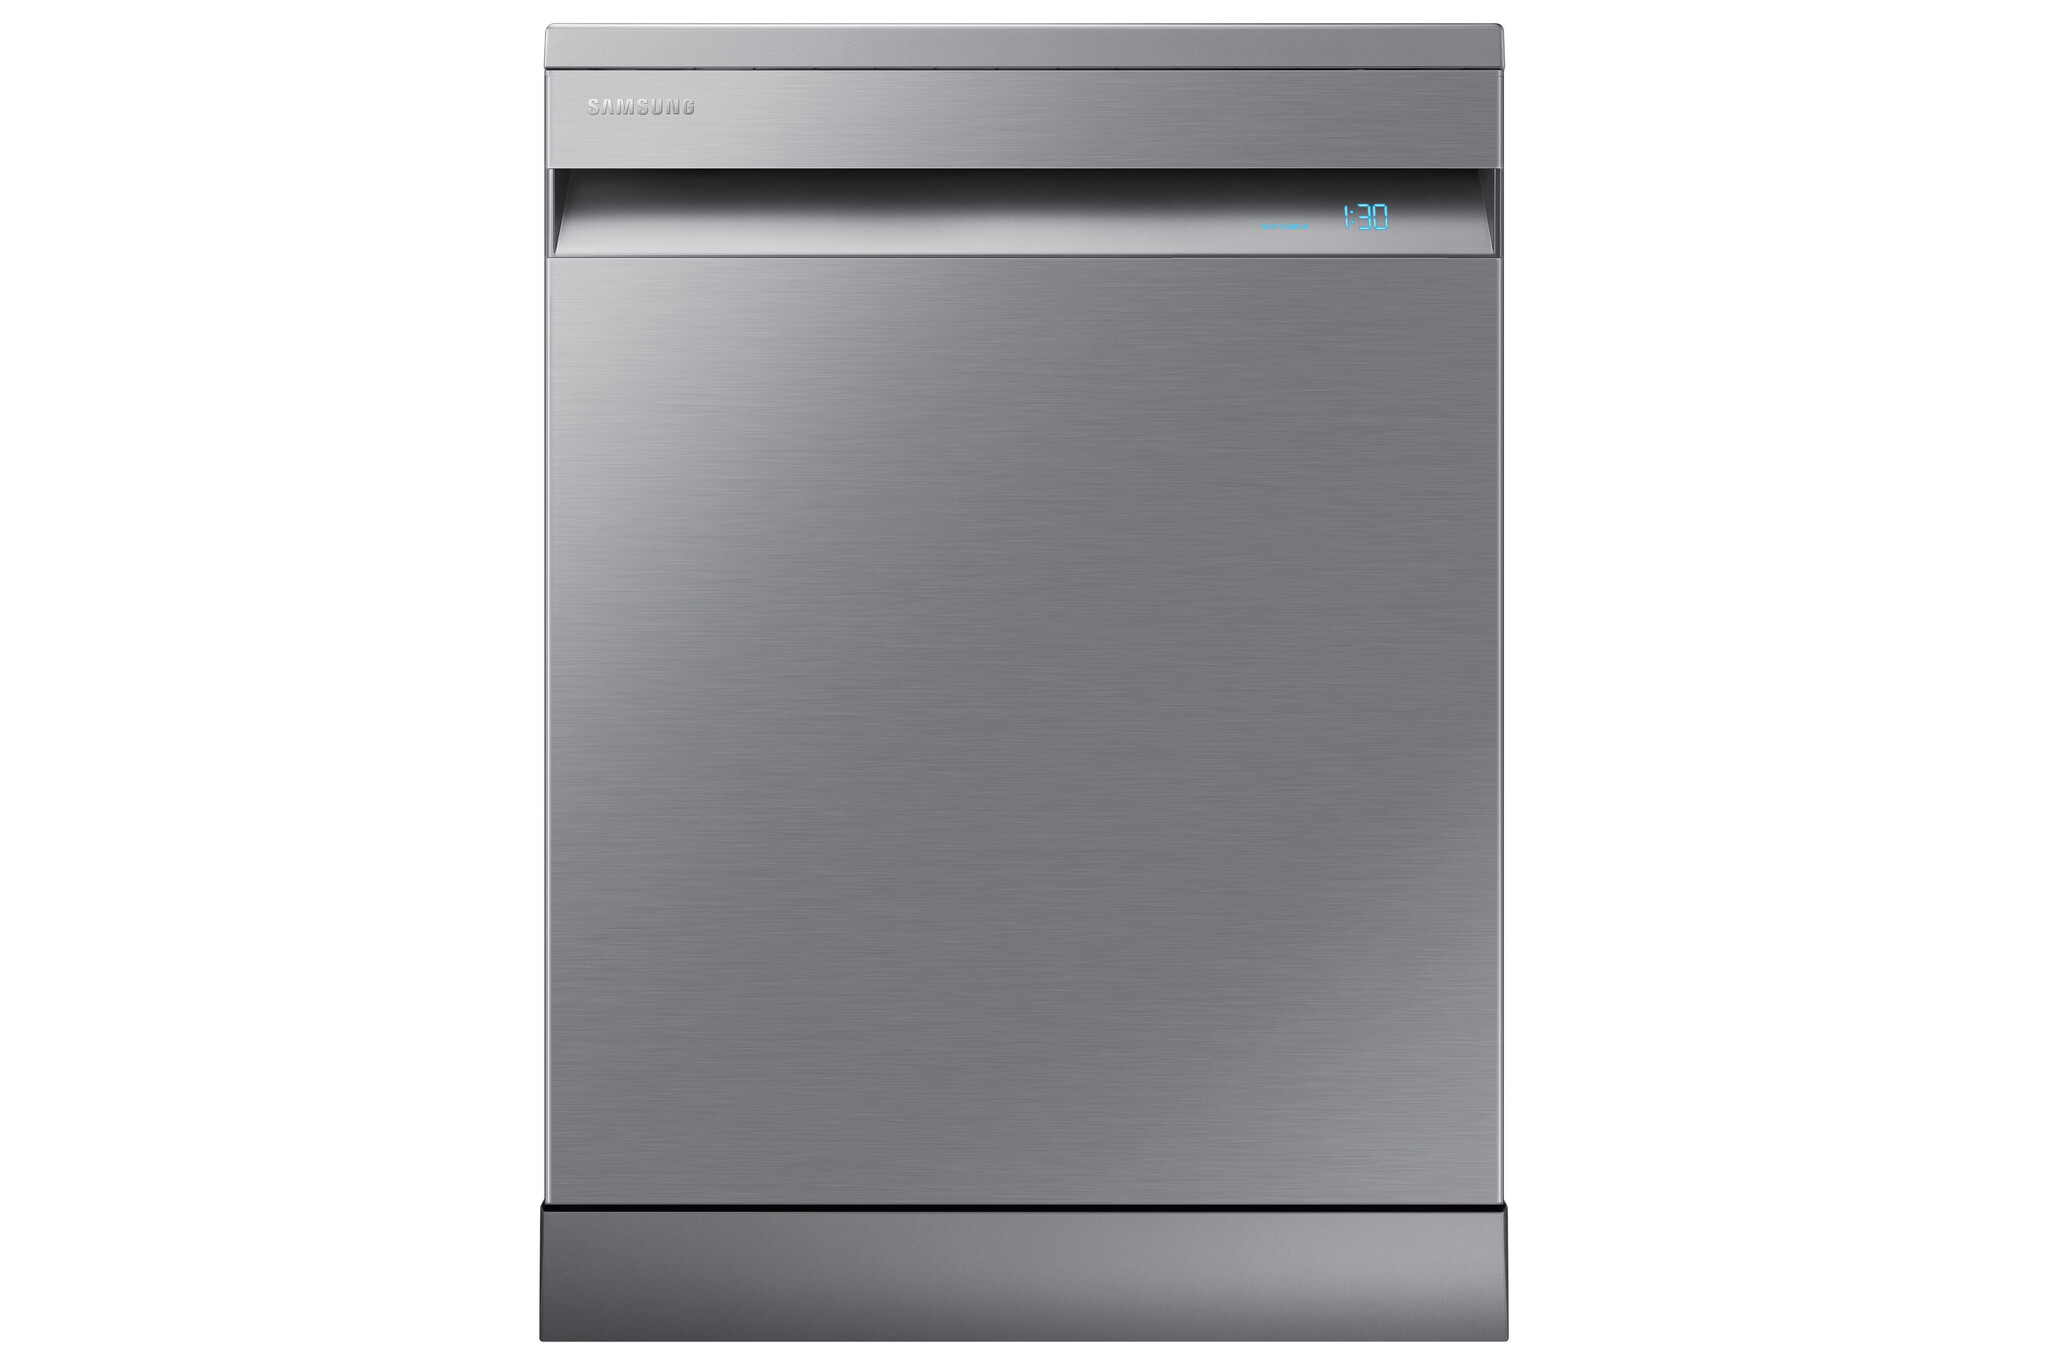 Samsung Series 11 DW60A8060FS Wifi Connected Standard Dishwasher – Stainless Steel – B Rated #365426